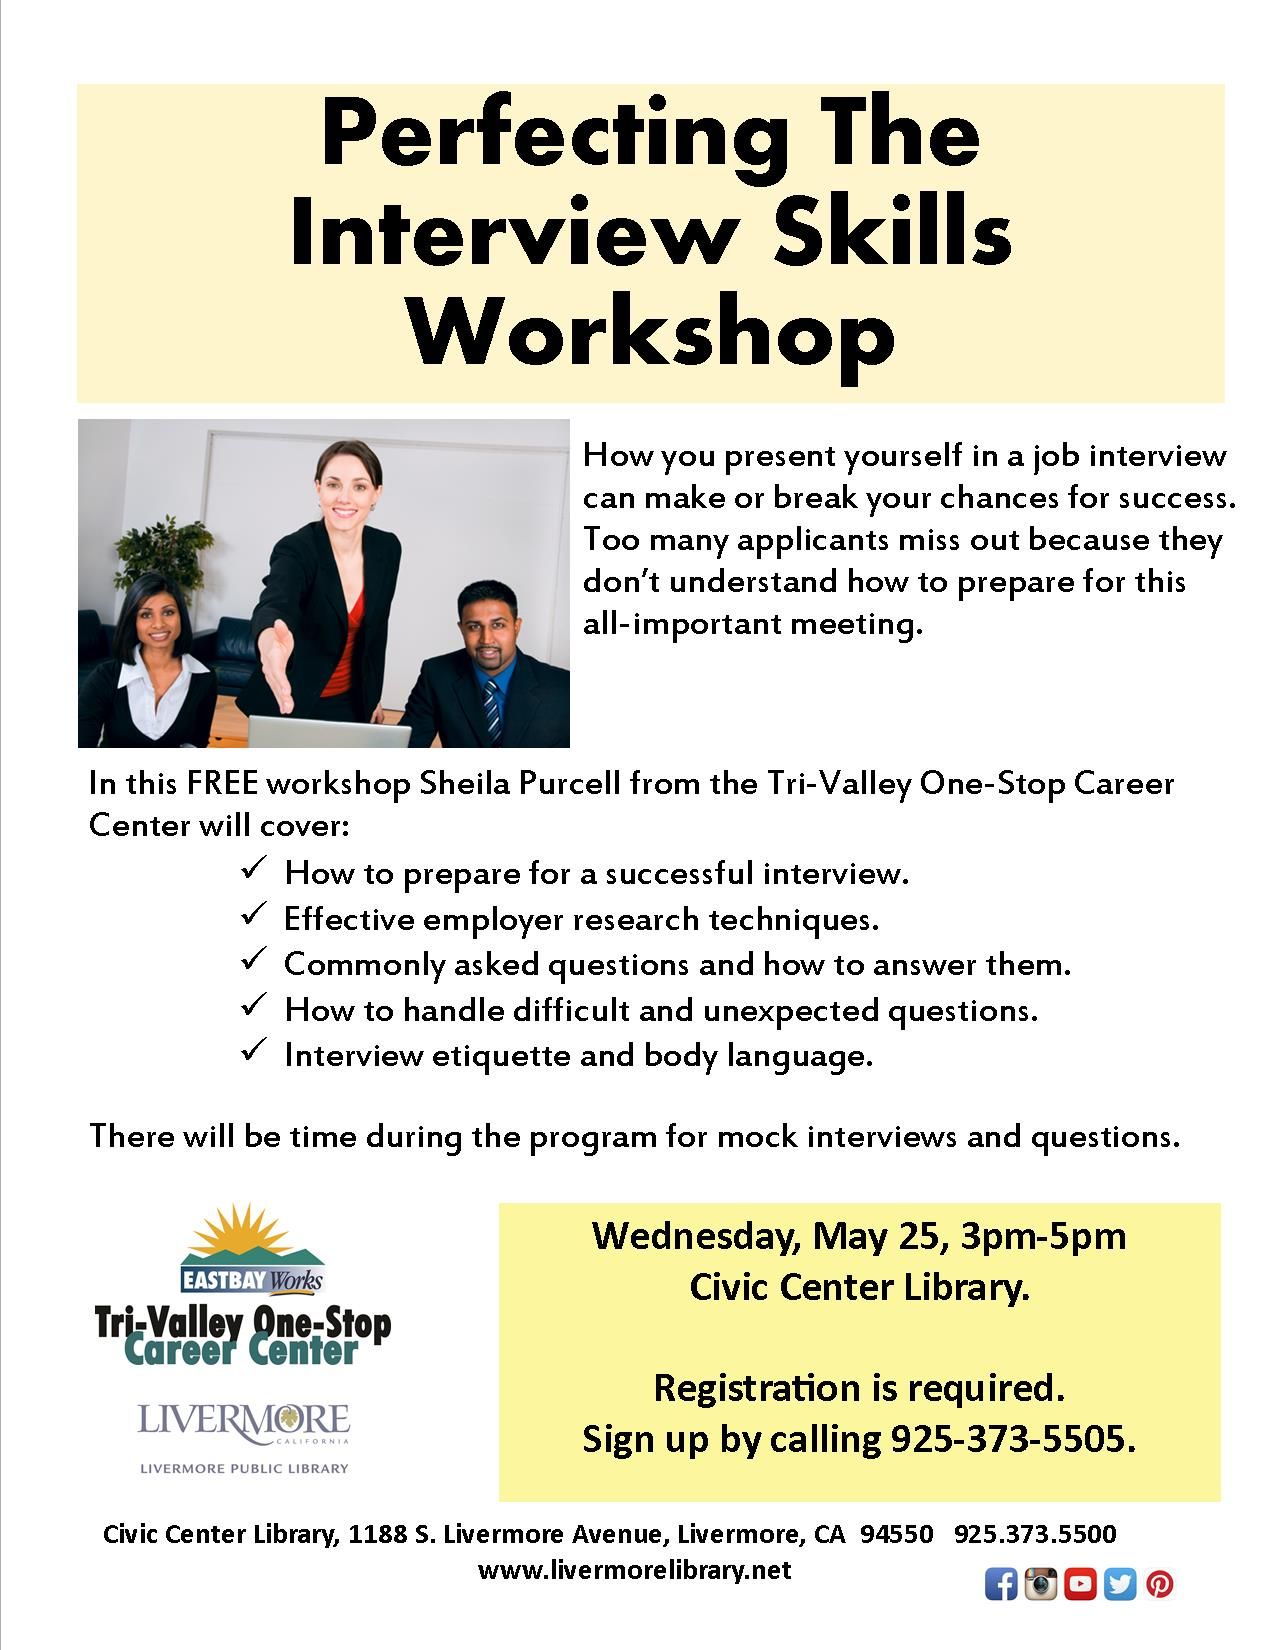 Learn how to ace your job interview at this workshop by ...